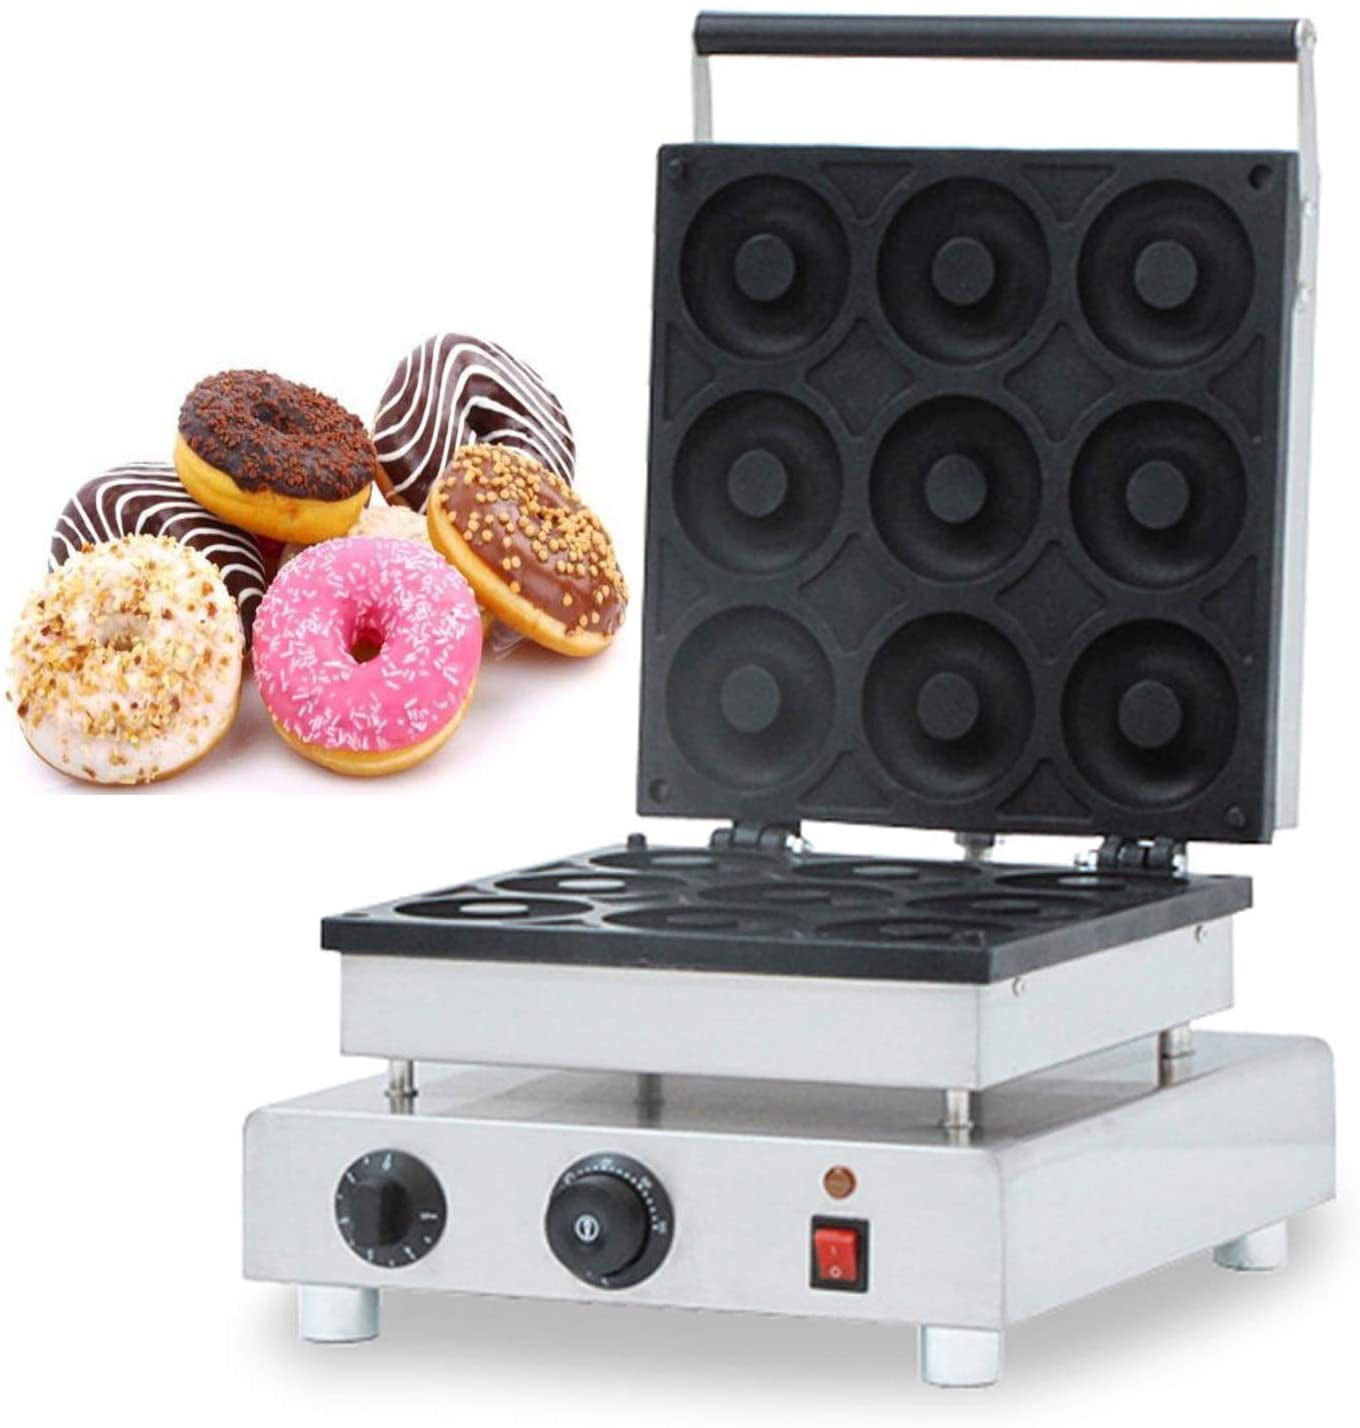 12 pcs Waffle Donut Machine Non-stick Temperature Control Timing Function Double-Sided Heating 1500KW LOYALHEARTDY Commercial Doughnut Baker Maker Machine